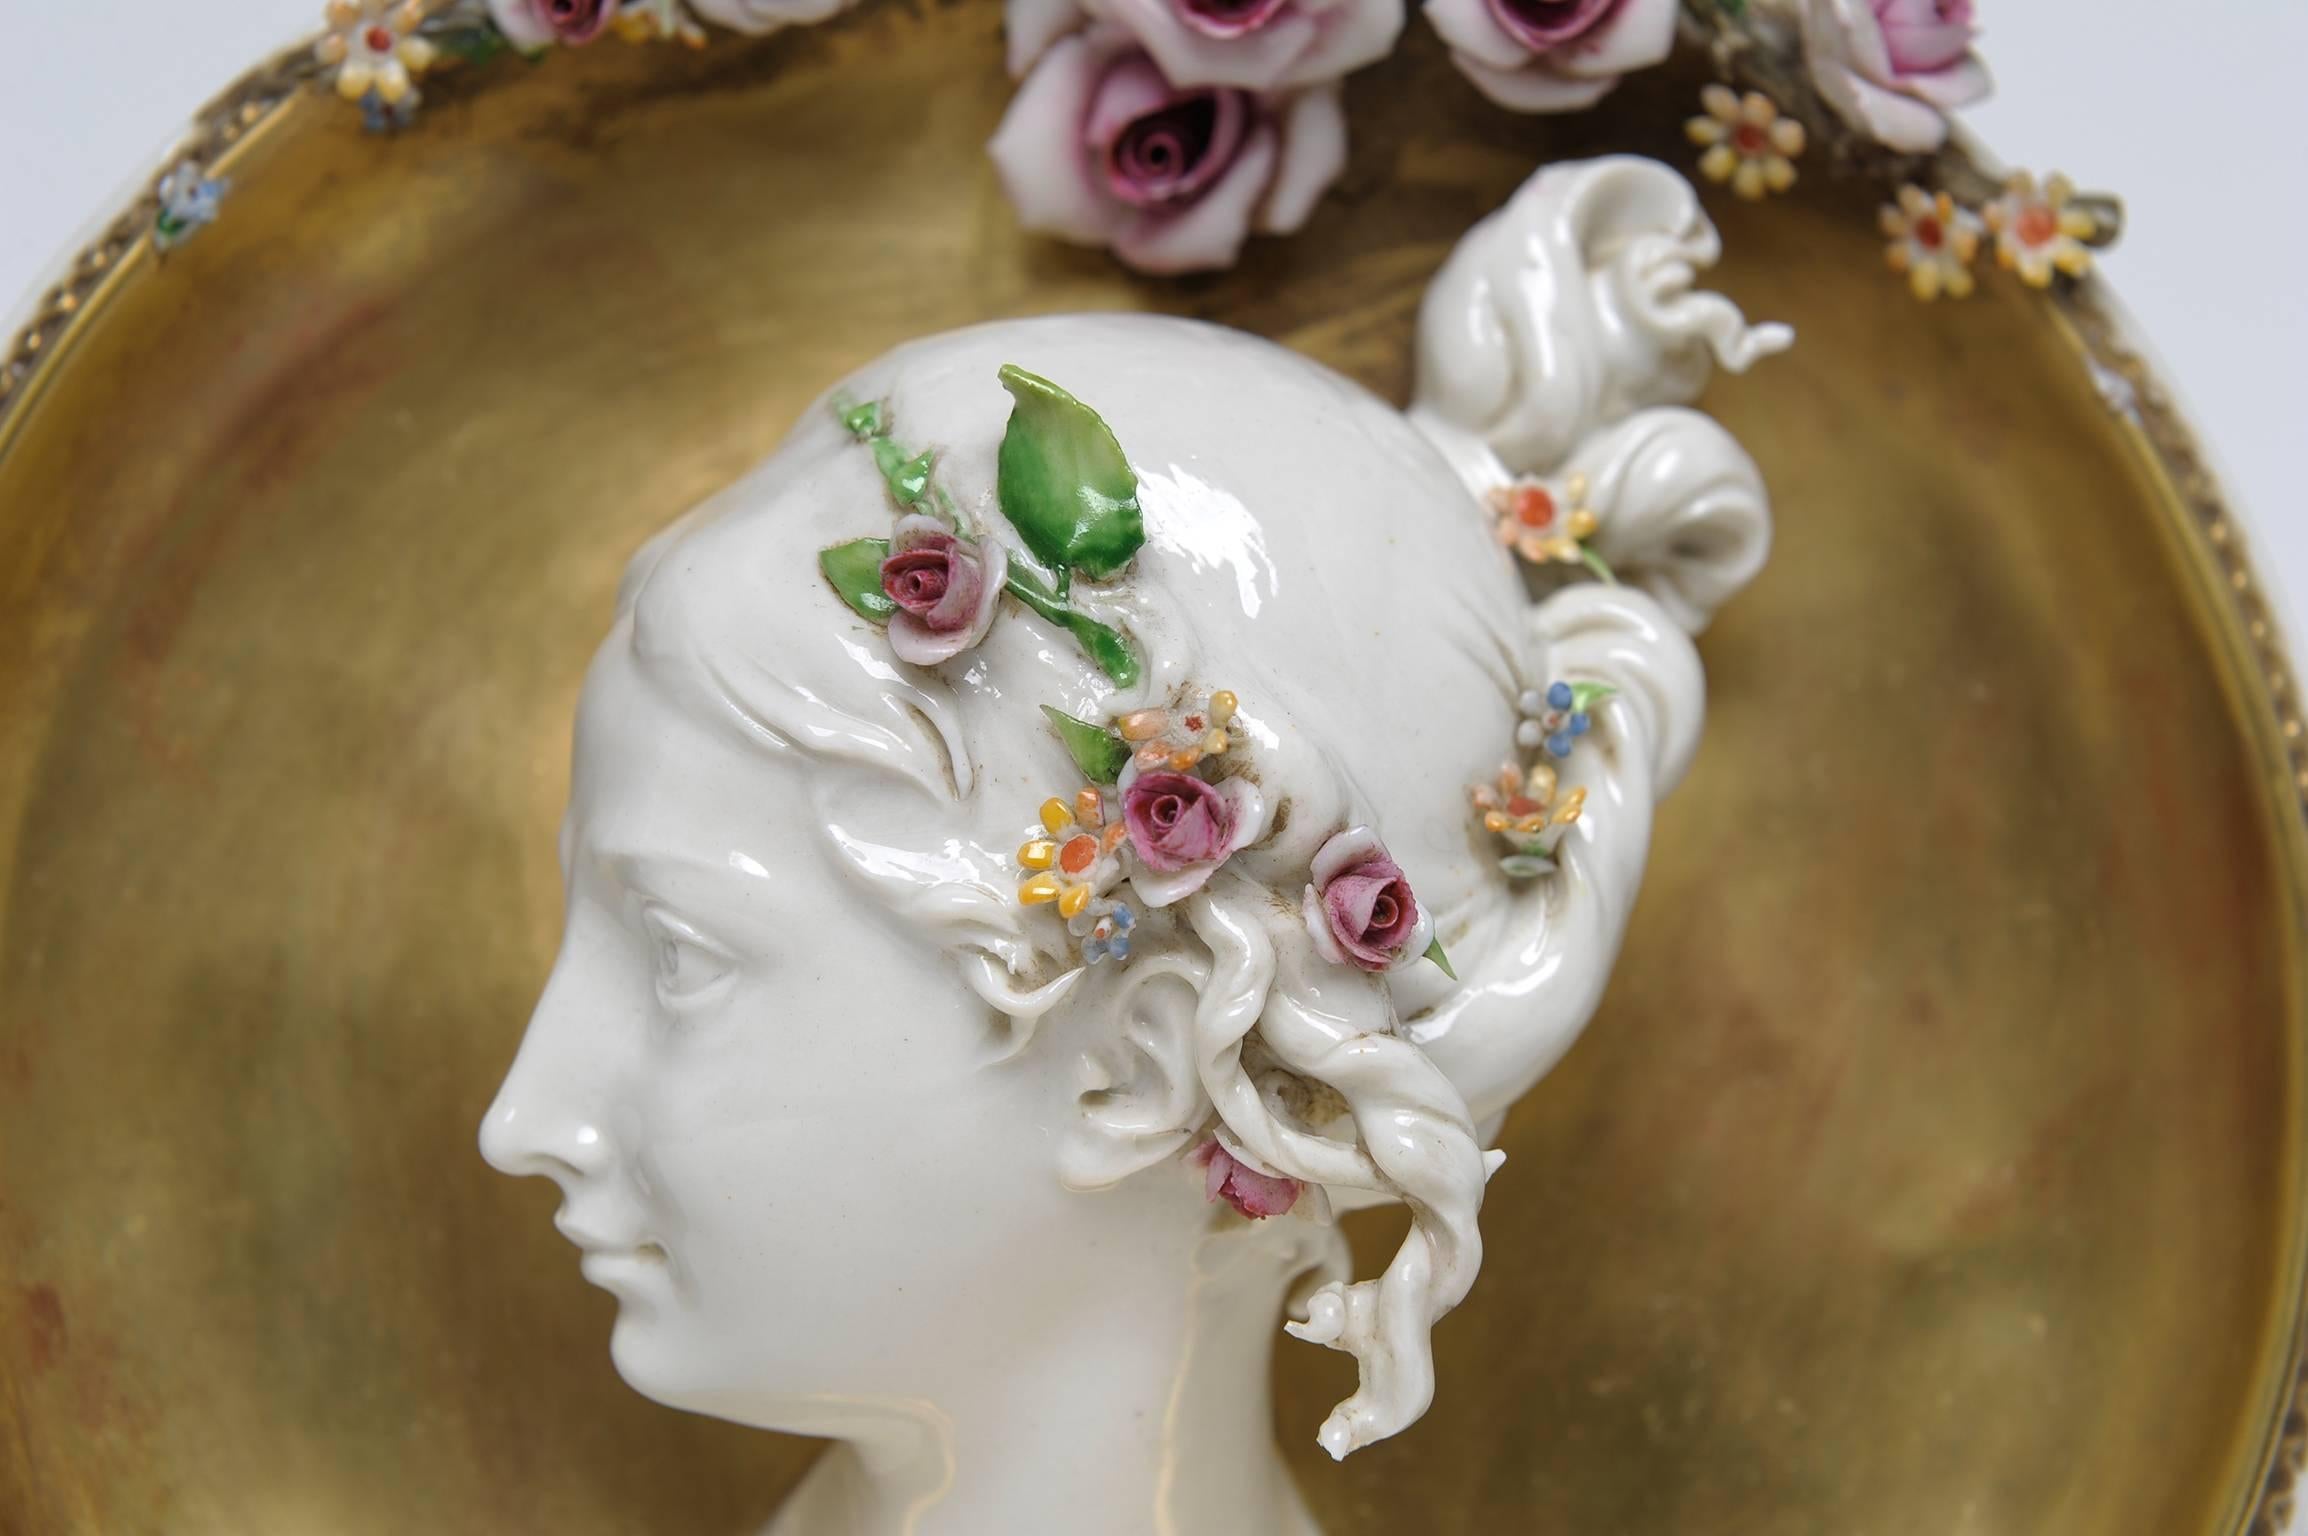 Rare vintage porcelains Bacchus and Ariadne wall little plates with gold : rare because they were created by 
Giuseppe Cappé, famous Italian artist (born 1921, died 2008) . Therefore they are signed Cappè.
He dedicated life to creation and